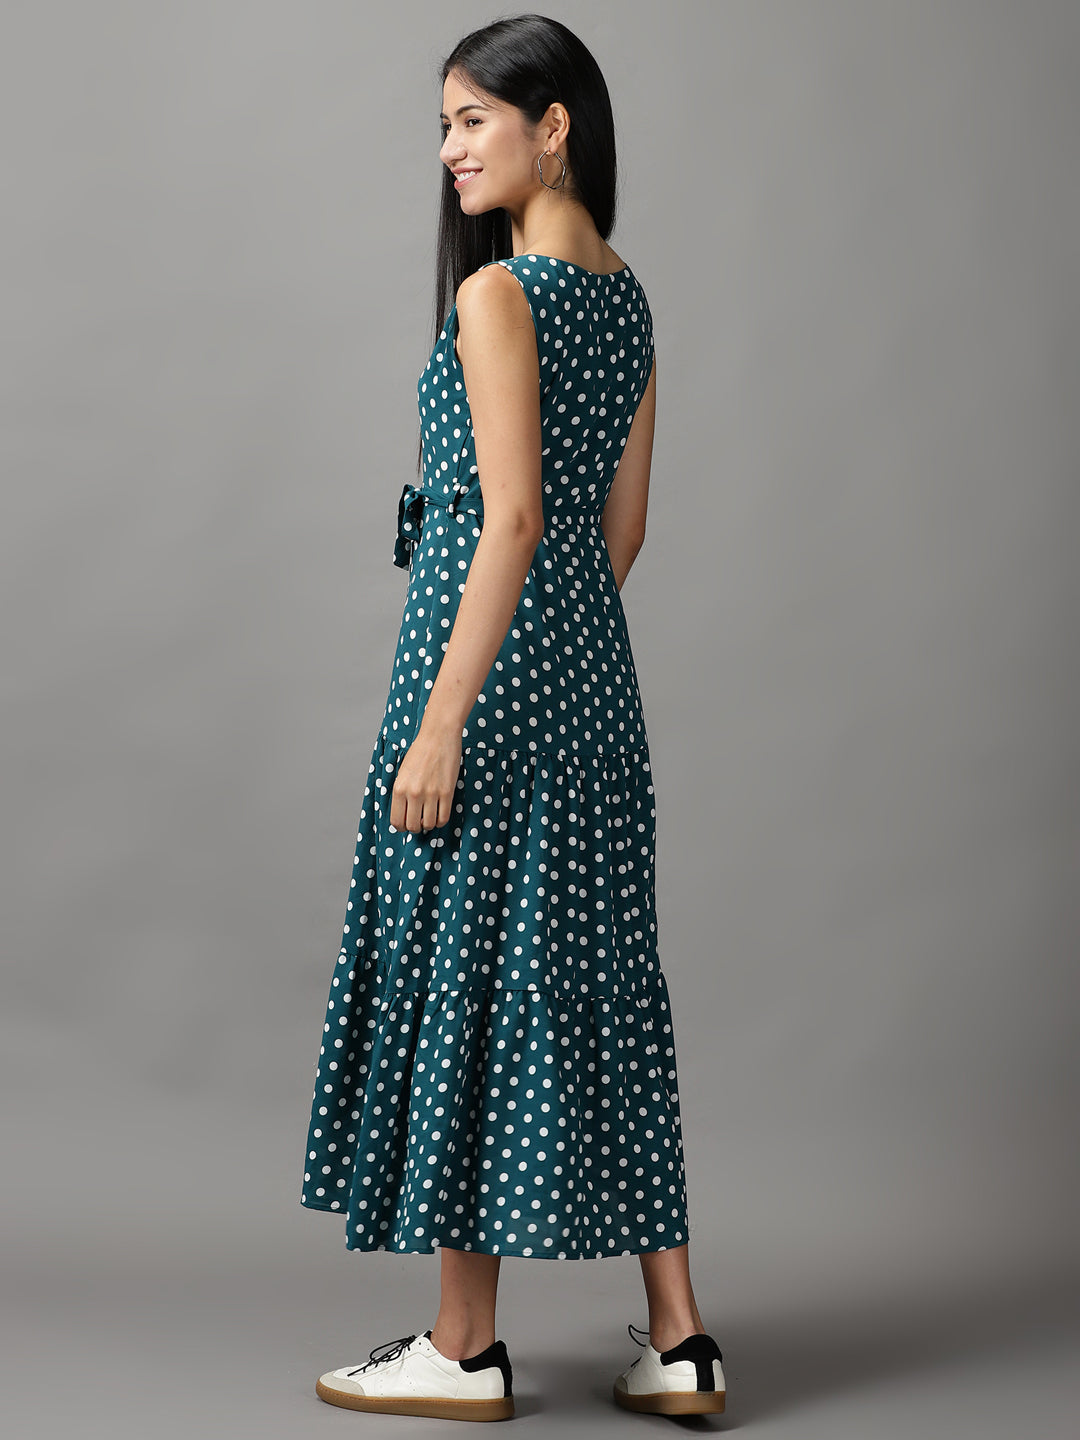 Women's Green Polka Dots Fit and Flare Dress